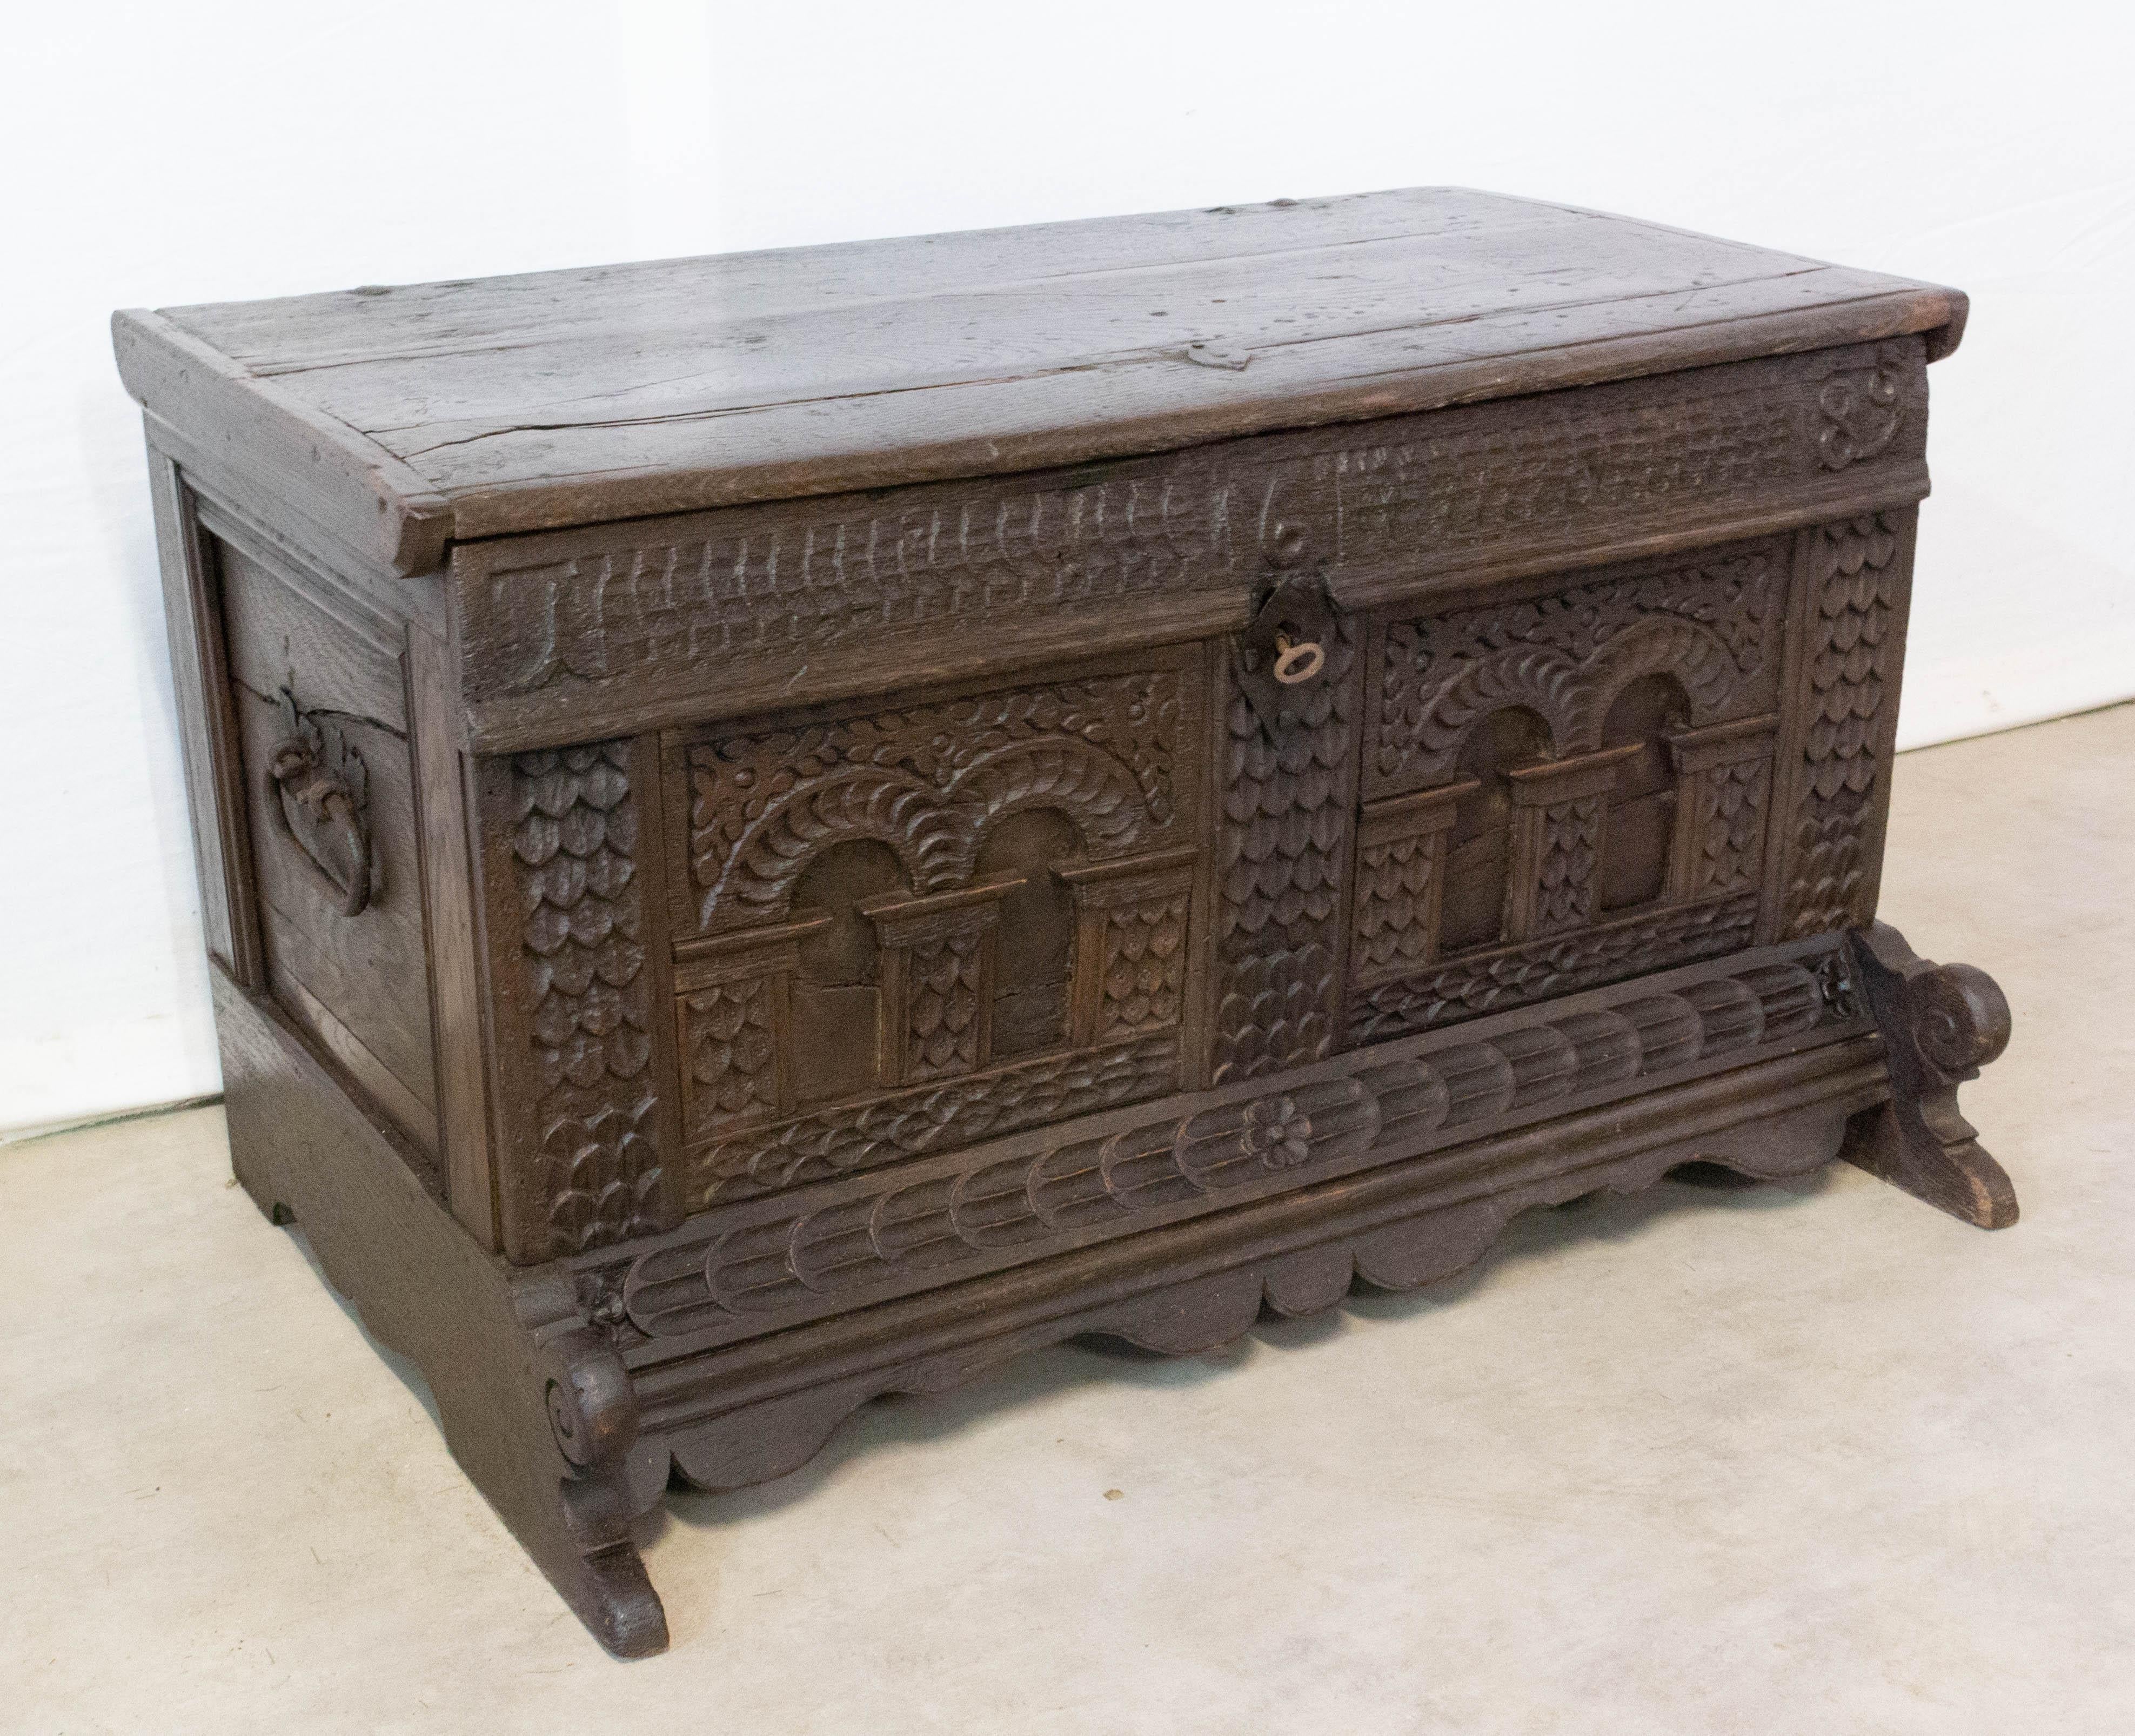 Coffer or chest French 17th century carved oak
French Provincial Country House
Very decorative and full of character
The top of the interior of the chest is divided to allow small objects to be stored. 
The date of manufacture is carved on the